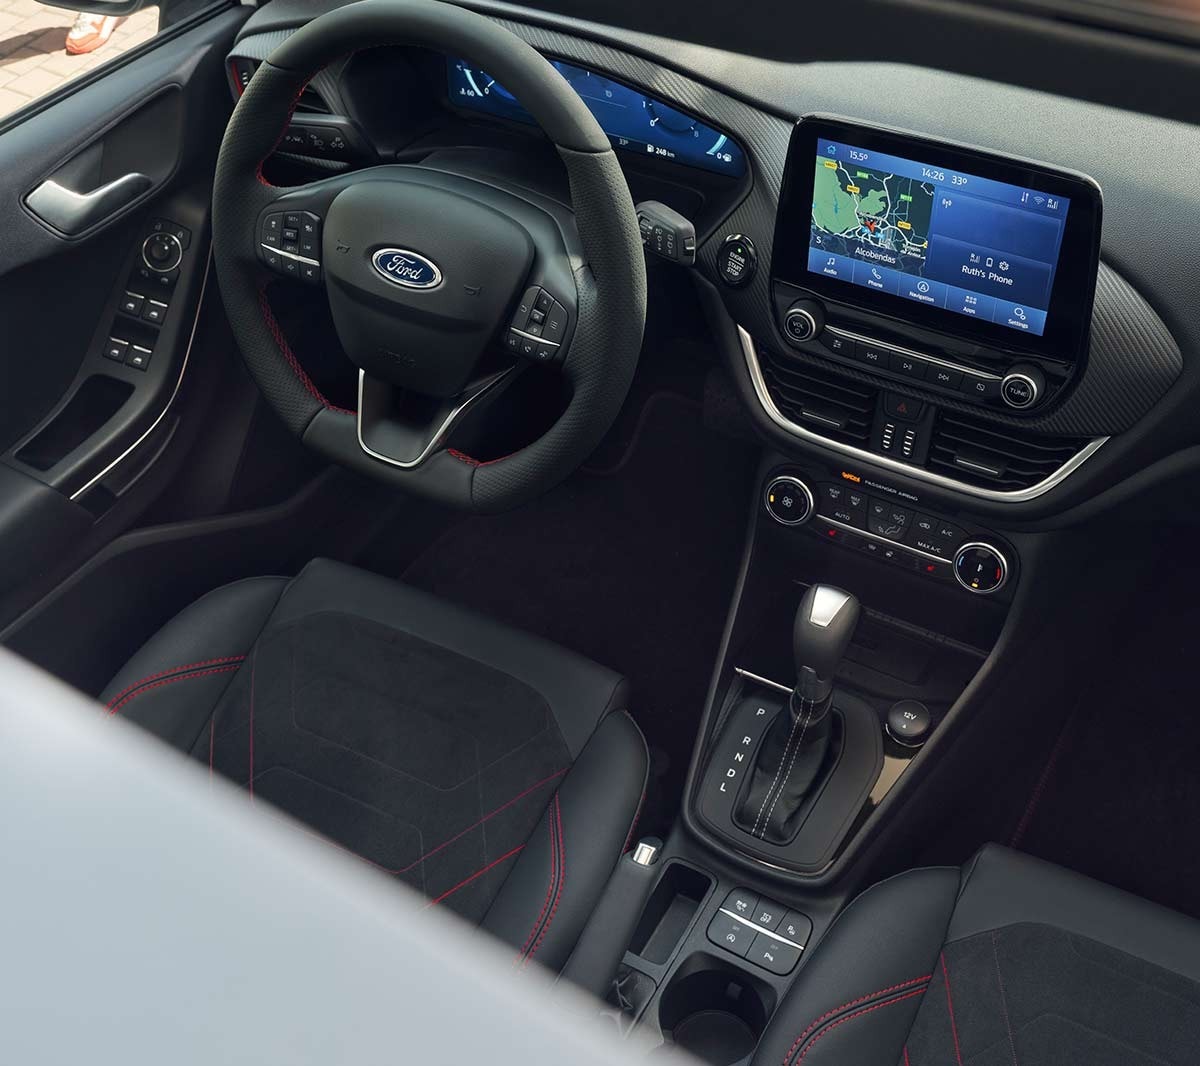 Ford Fiesta interior view of touchscreen